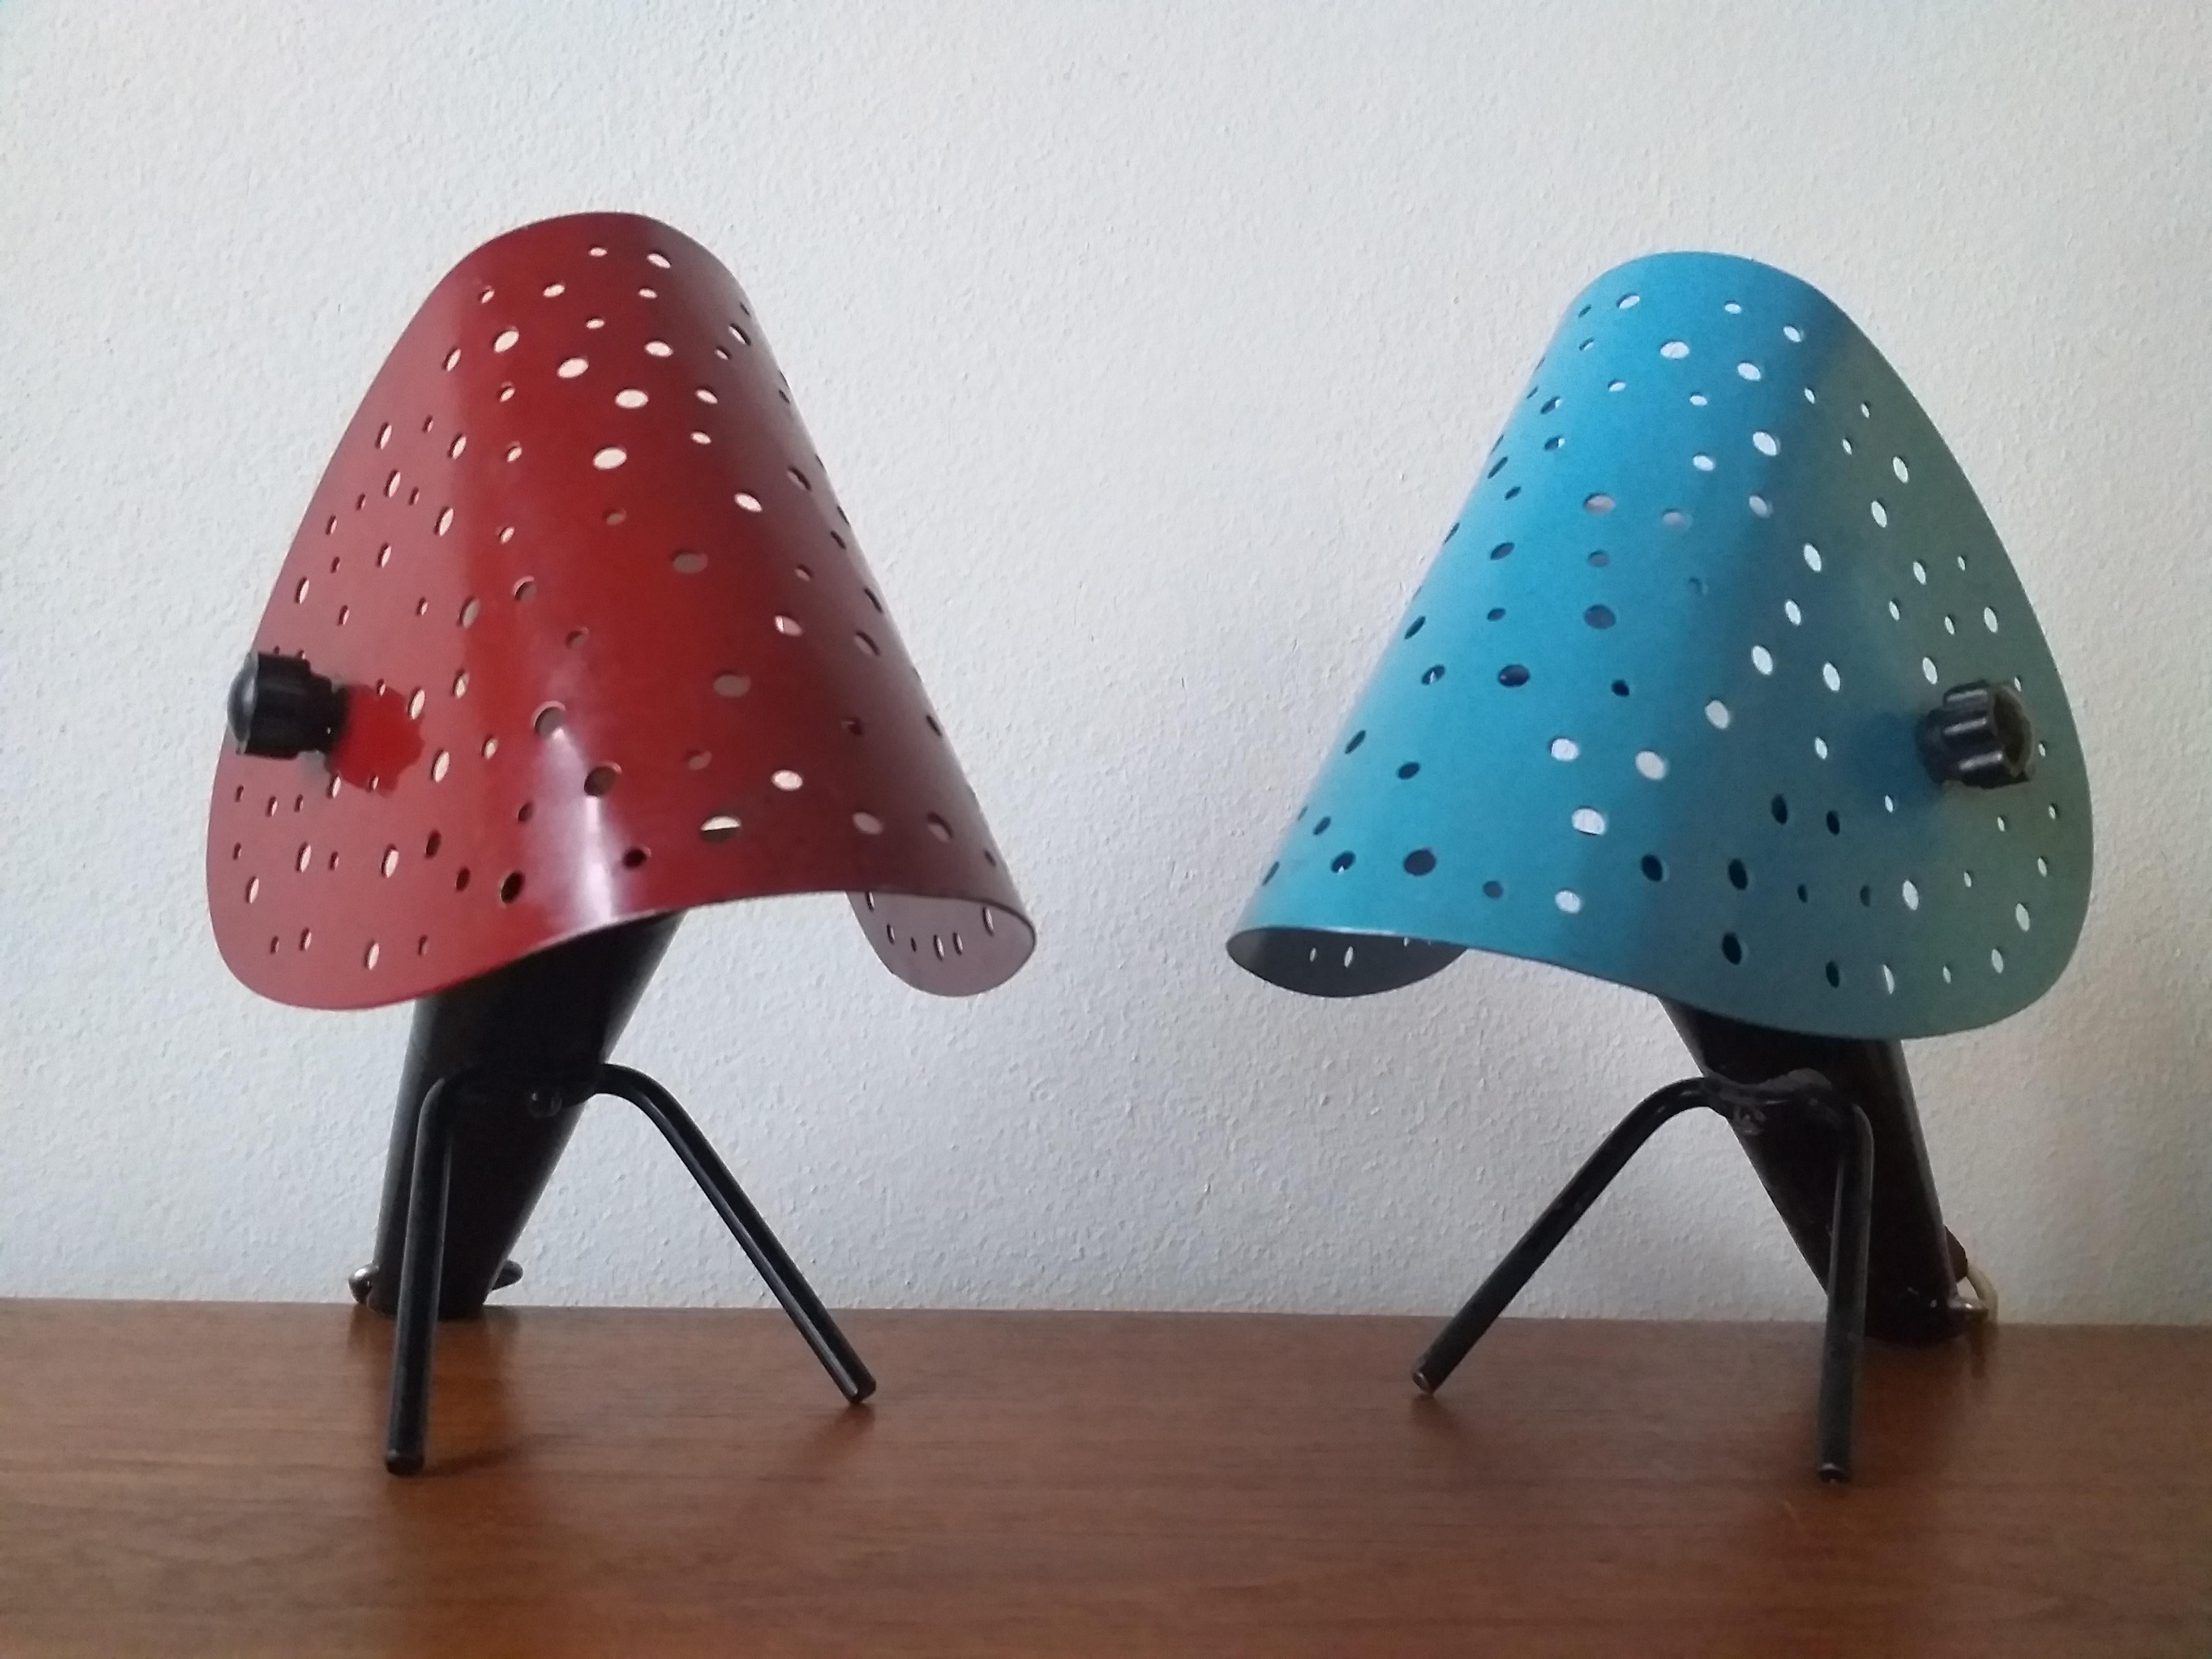 Pair of Midcentury Table Lamps by Ernst Igl for Hillebrand, 1950s For Sale 5